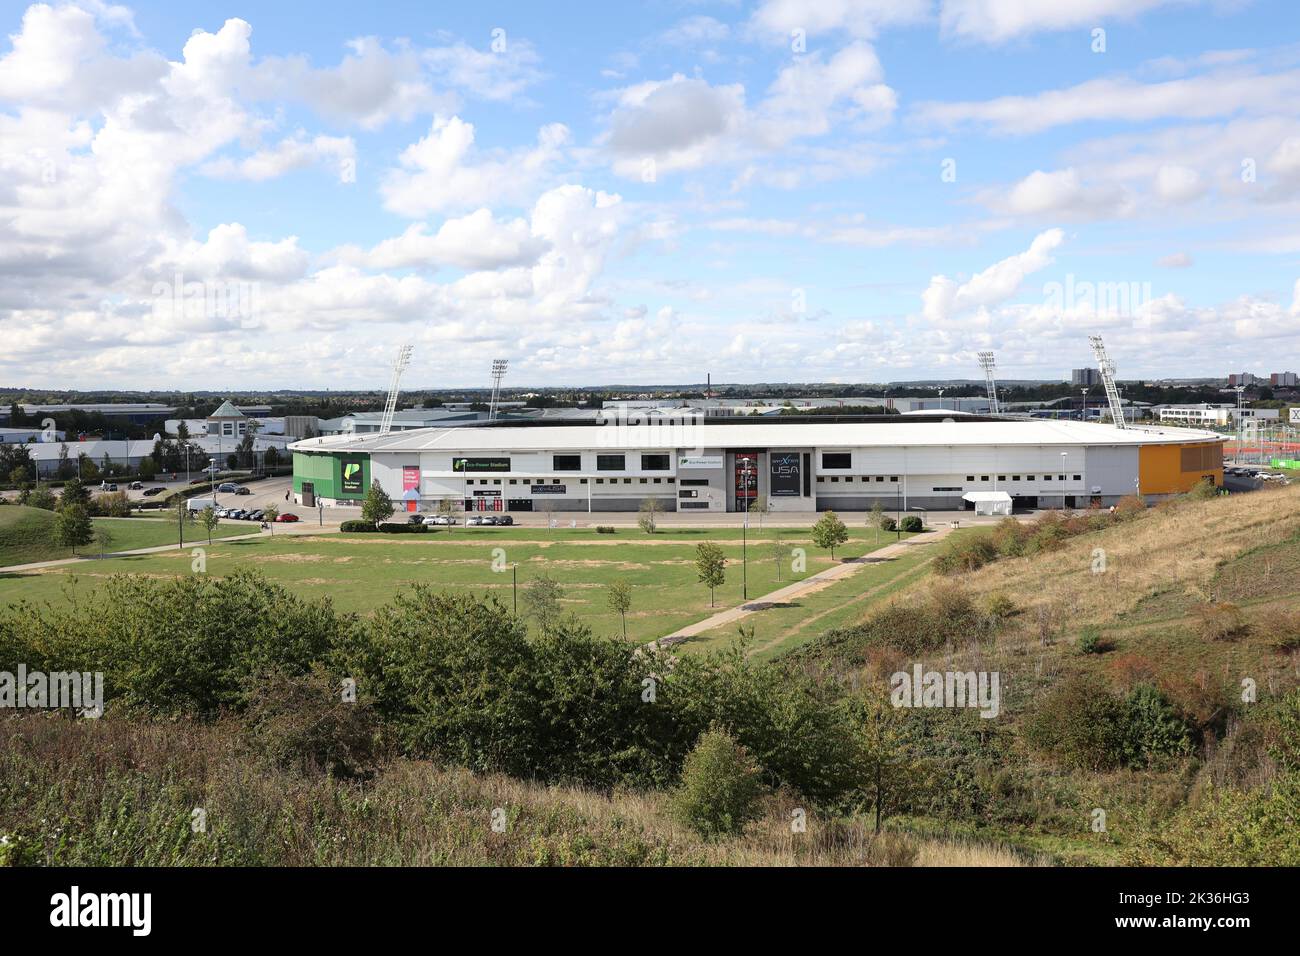 General View of the Eco-Power Stadium during the EFL League Two match between Doncaster Rovers and Crawley Town. 24th September 2022 Stock Photo